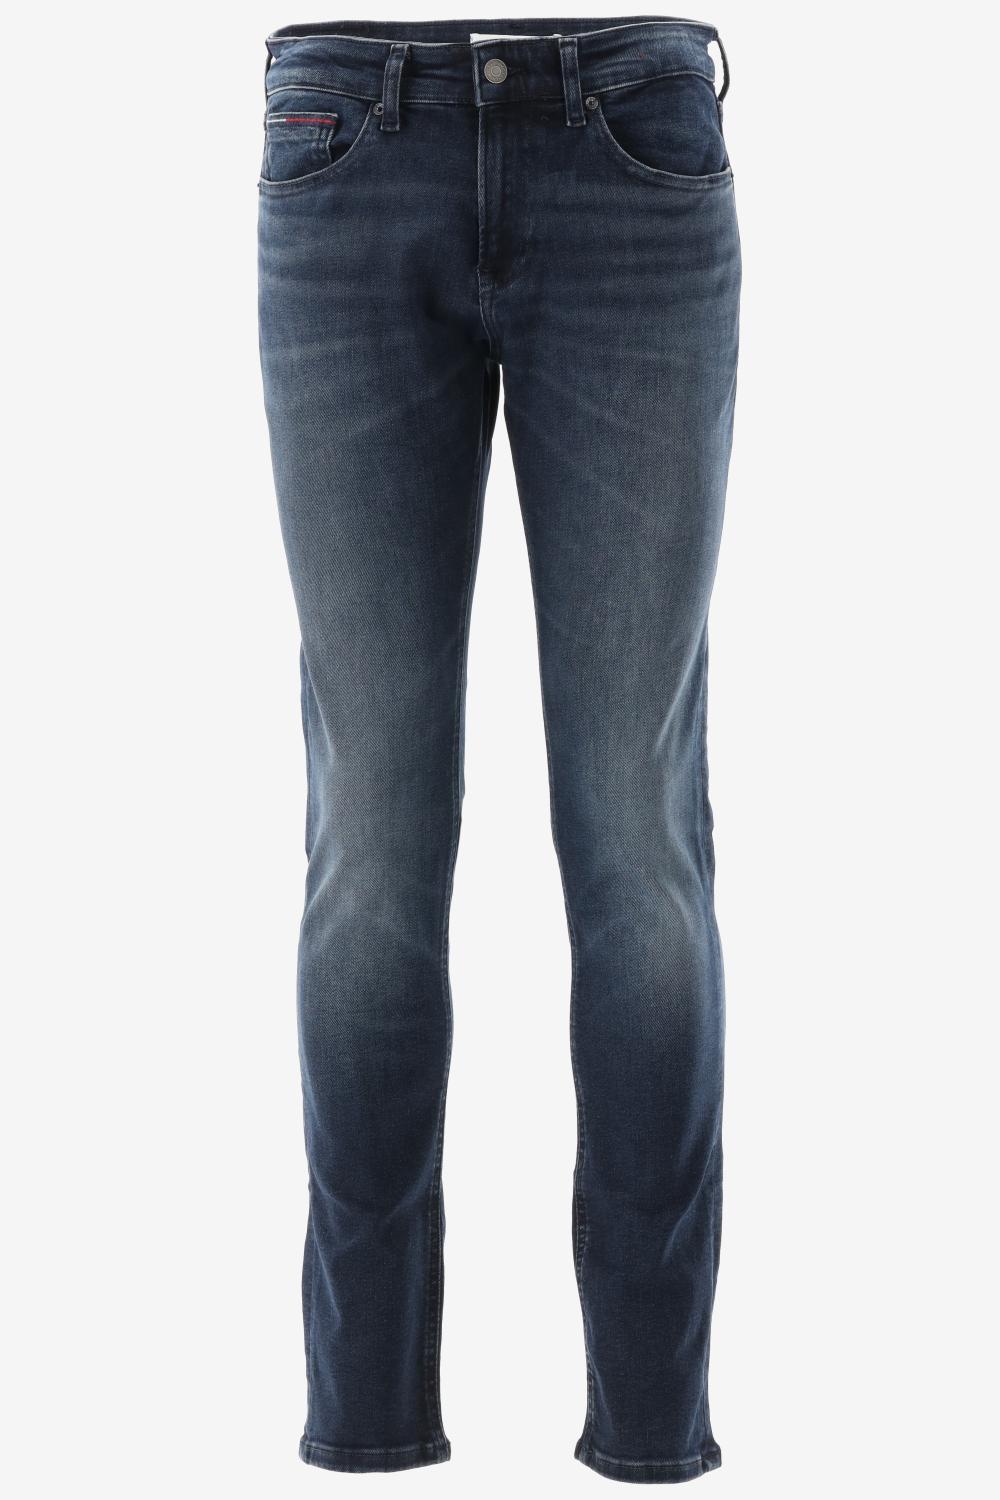 Tommy Jeans Jeans - Slim Fit - Blauw - 32-34